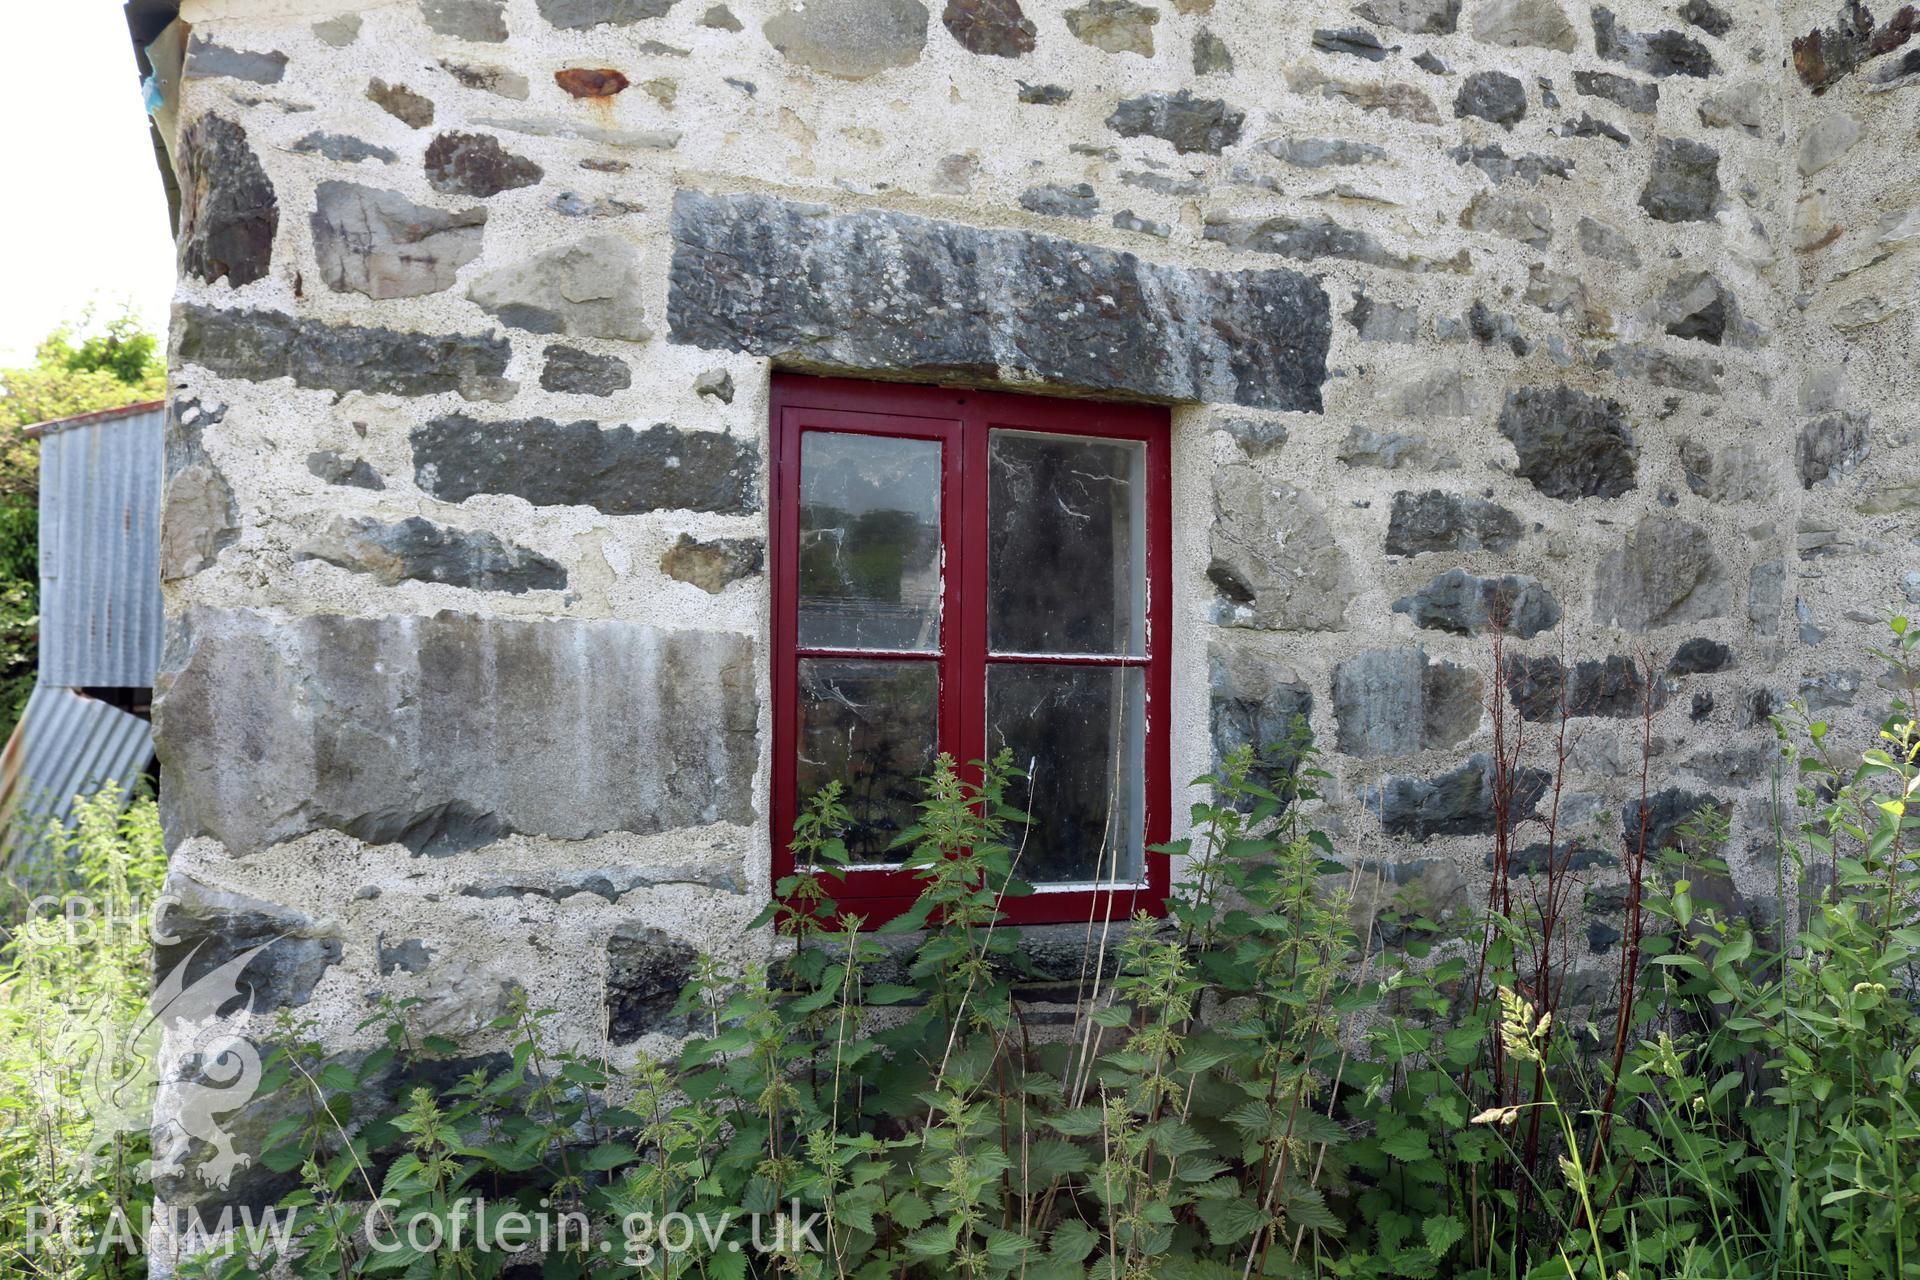 Photograph showing exterior view of barn and cottage window at Maes yr Hendre, taken by Dr Marian Gwyn, 6th July 2016. (Original Reference no. 0048)